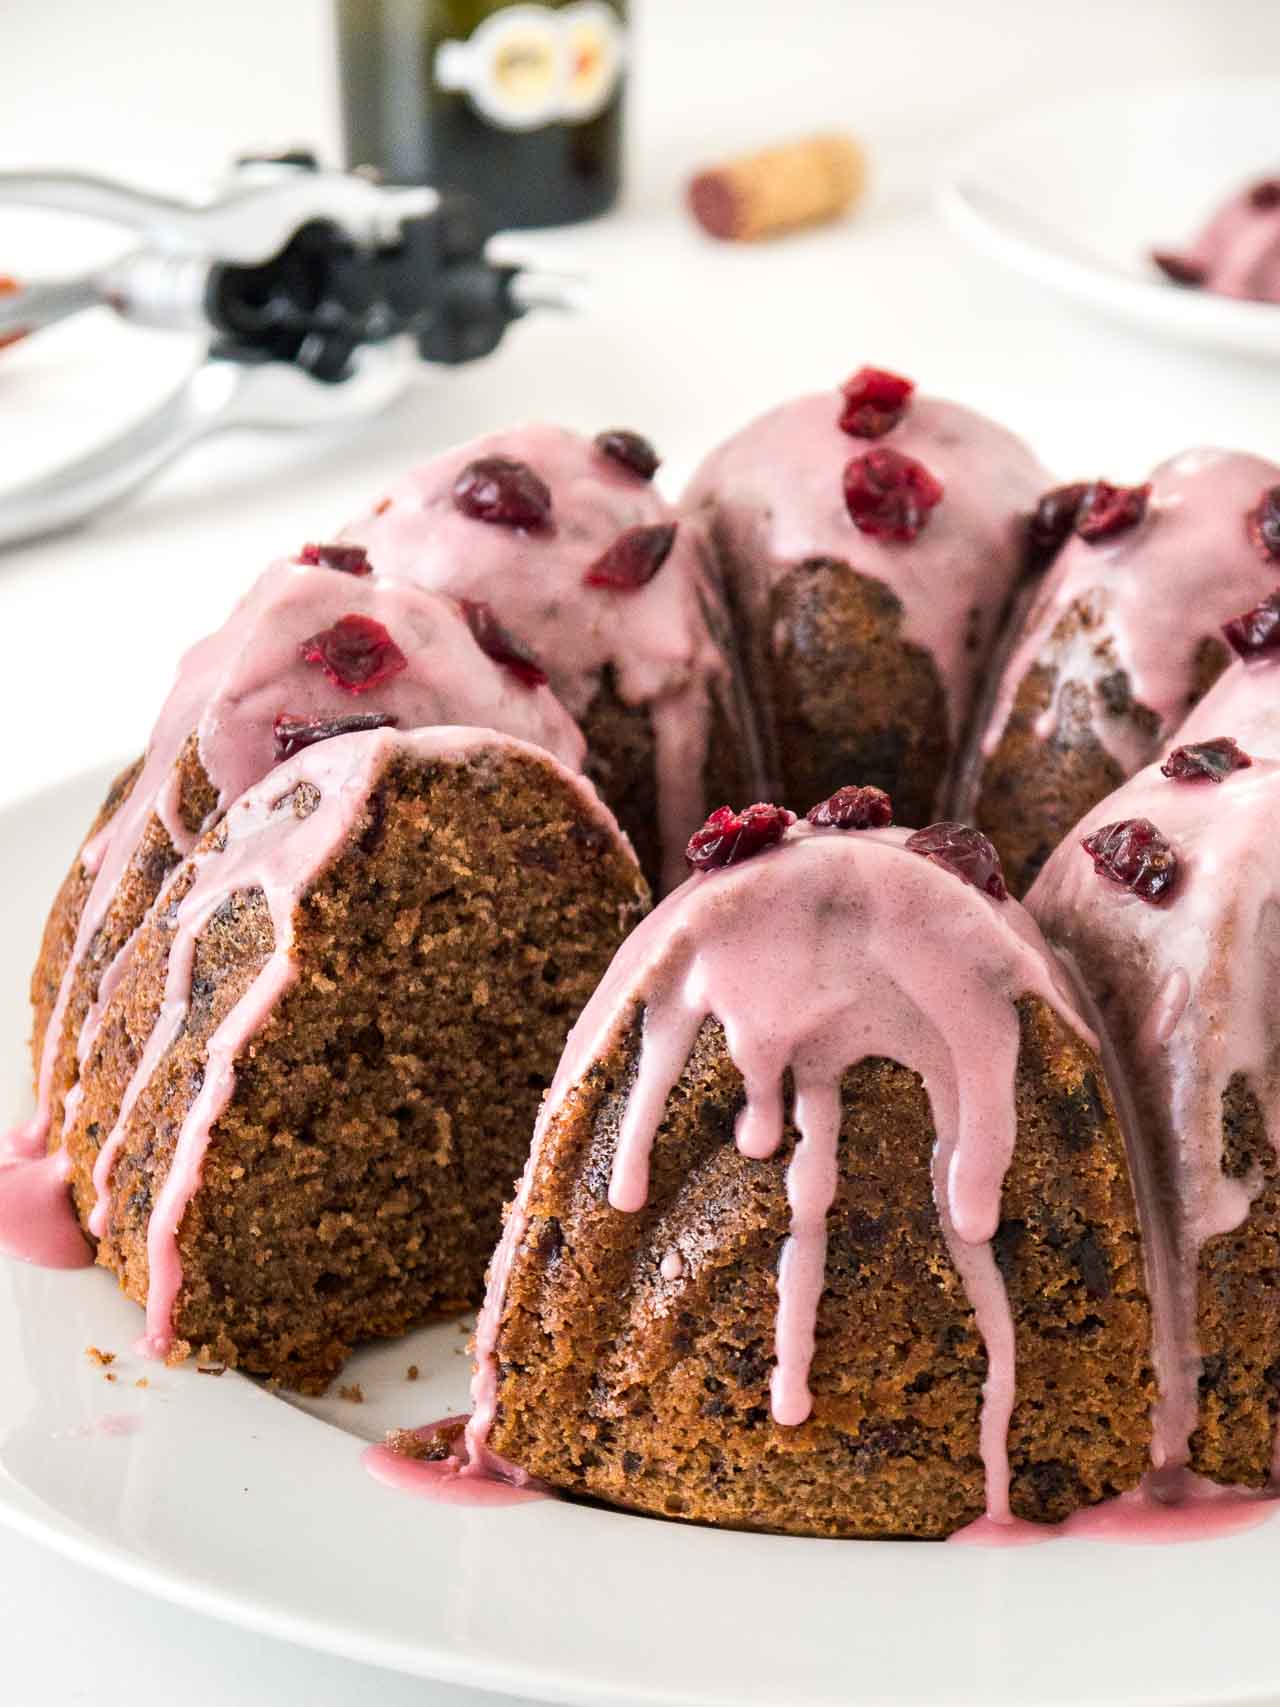 A chocolate cranberry bundt cake with pink frosting, garnished with dried cranberries on a white plate. A piece of the cake has been cut out. In the background, there\'s a stainless steel sugar bowl and a wine opener.